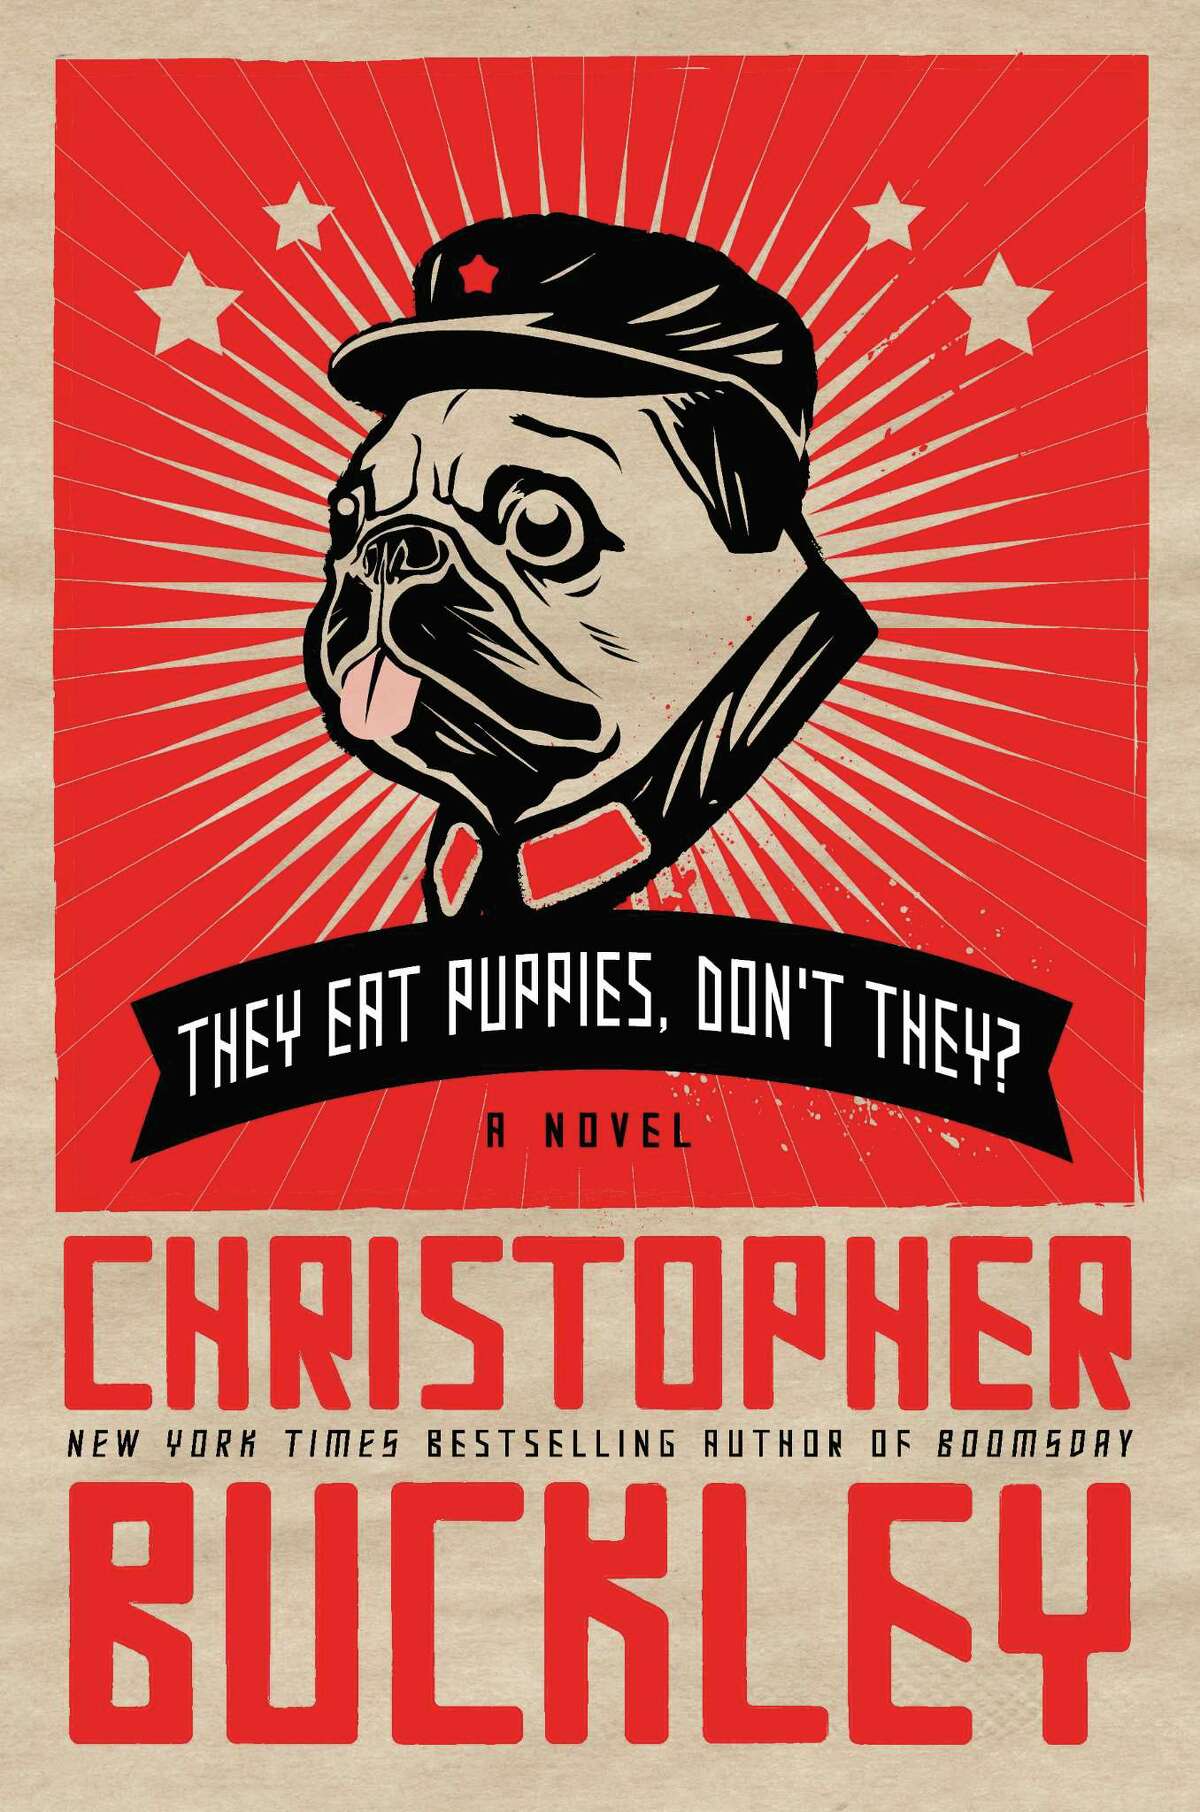 Christopher Buckleyís latest book, " They Eat Puppies, Donít They," is satire about U.S.-China relations.